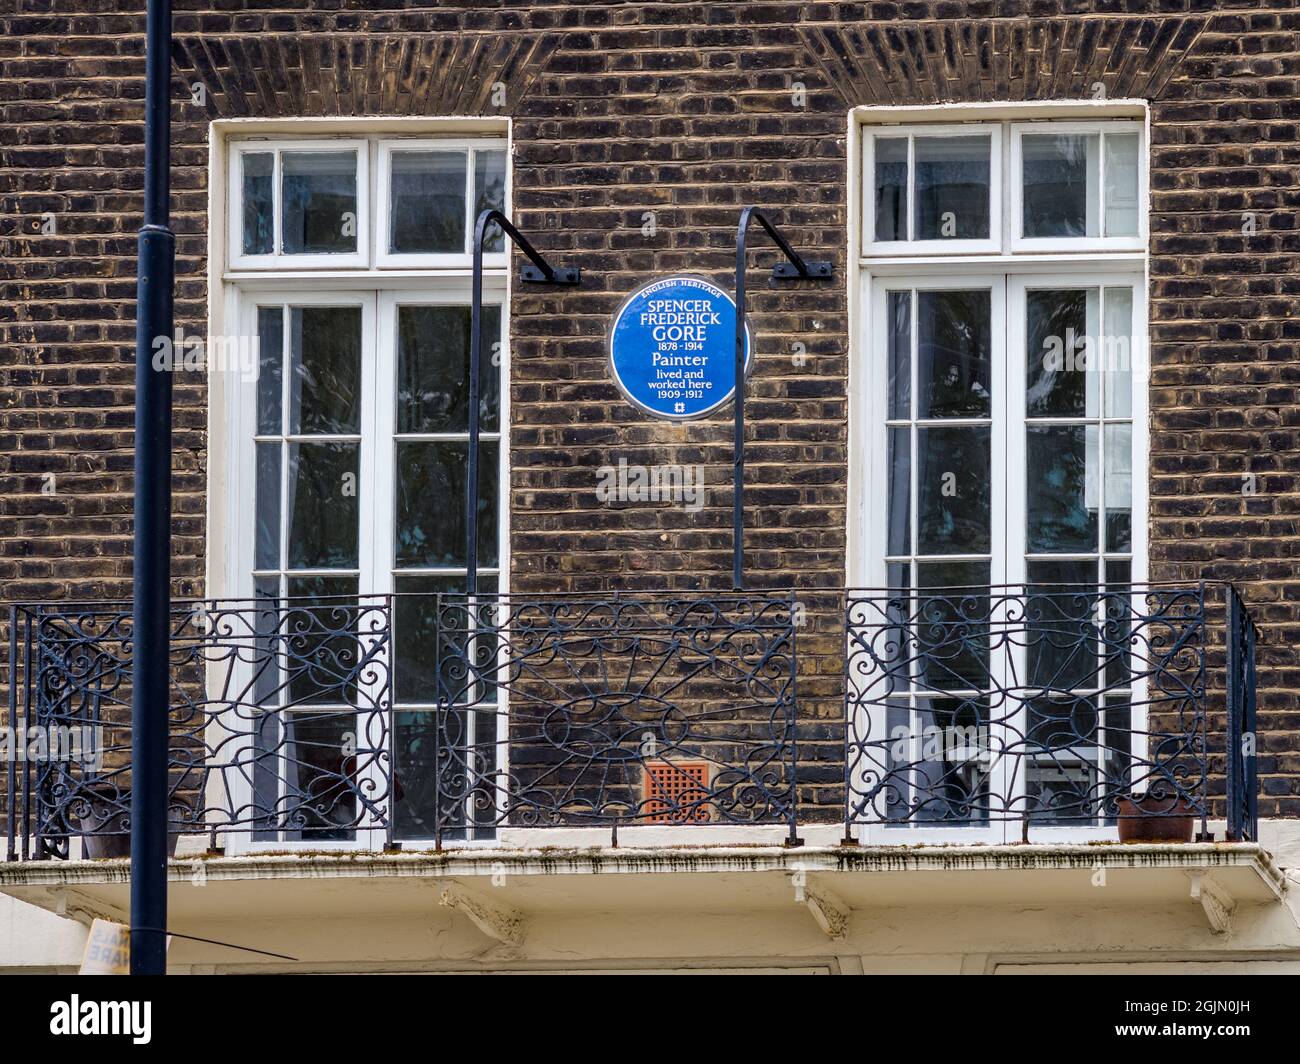 Spencer Frederick Gore Blue Plaque at 31 Mornington Crescent, London - SPENCER FREDERICK GORE 1878-1914 Painter lived and worked here 1909-1912 Stock Photo